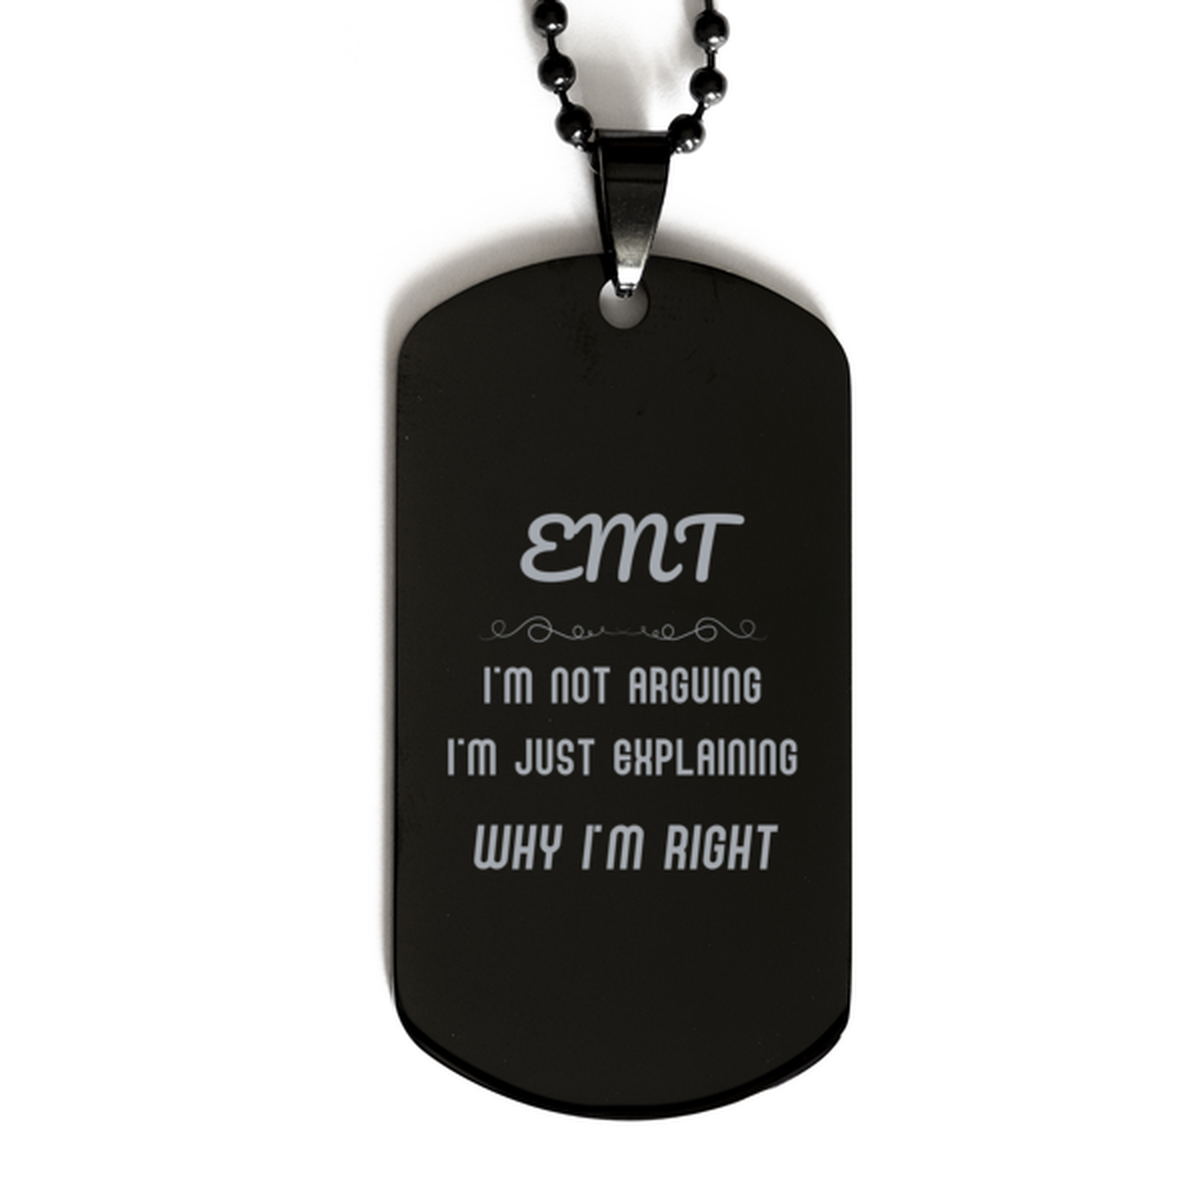 EMT I'm not Arguing. I'm Just Explaining Why I'm RIGHT Black Dog Tag, Funny Saying Quote EMT Gifts For EMT Graduation Birthday Christmas Gifts for Men Women Coworker